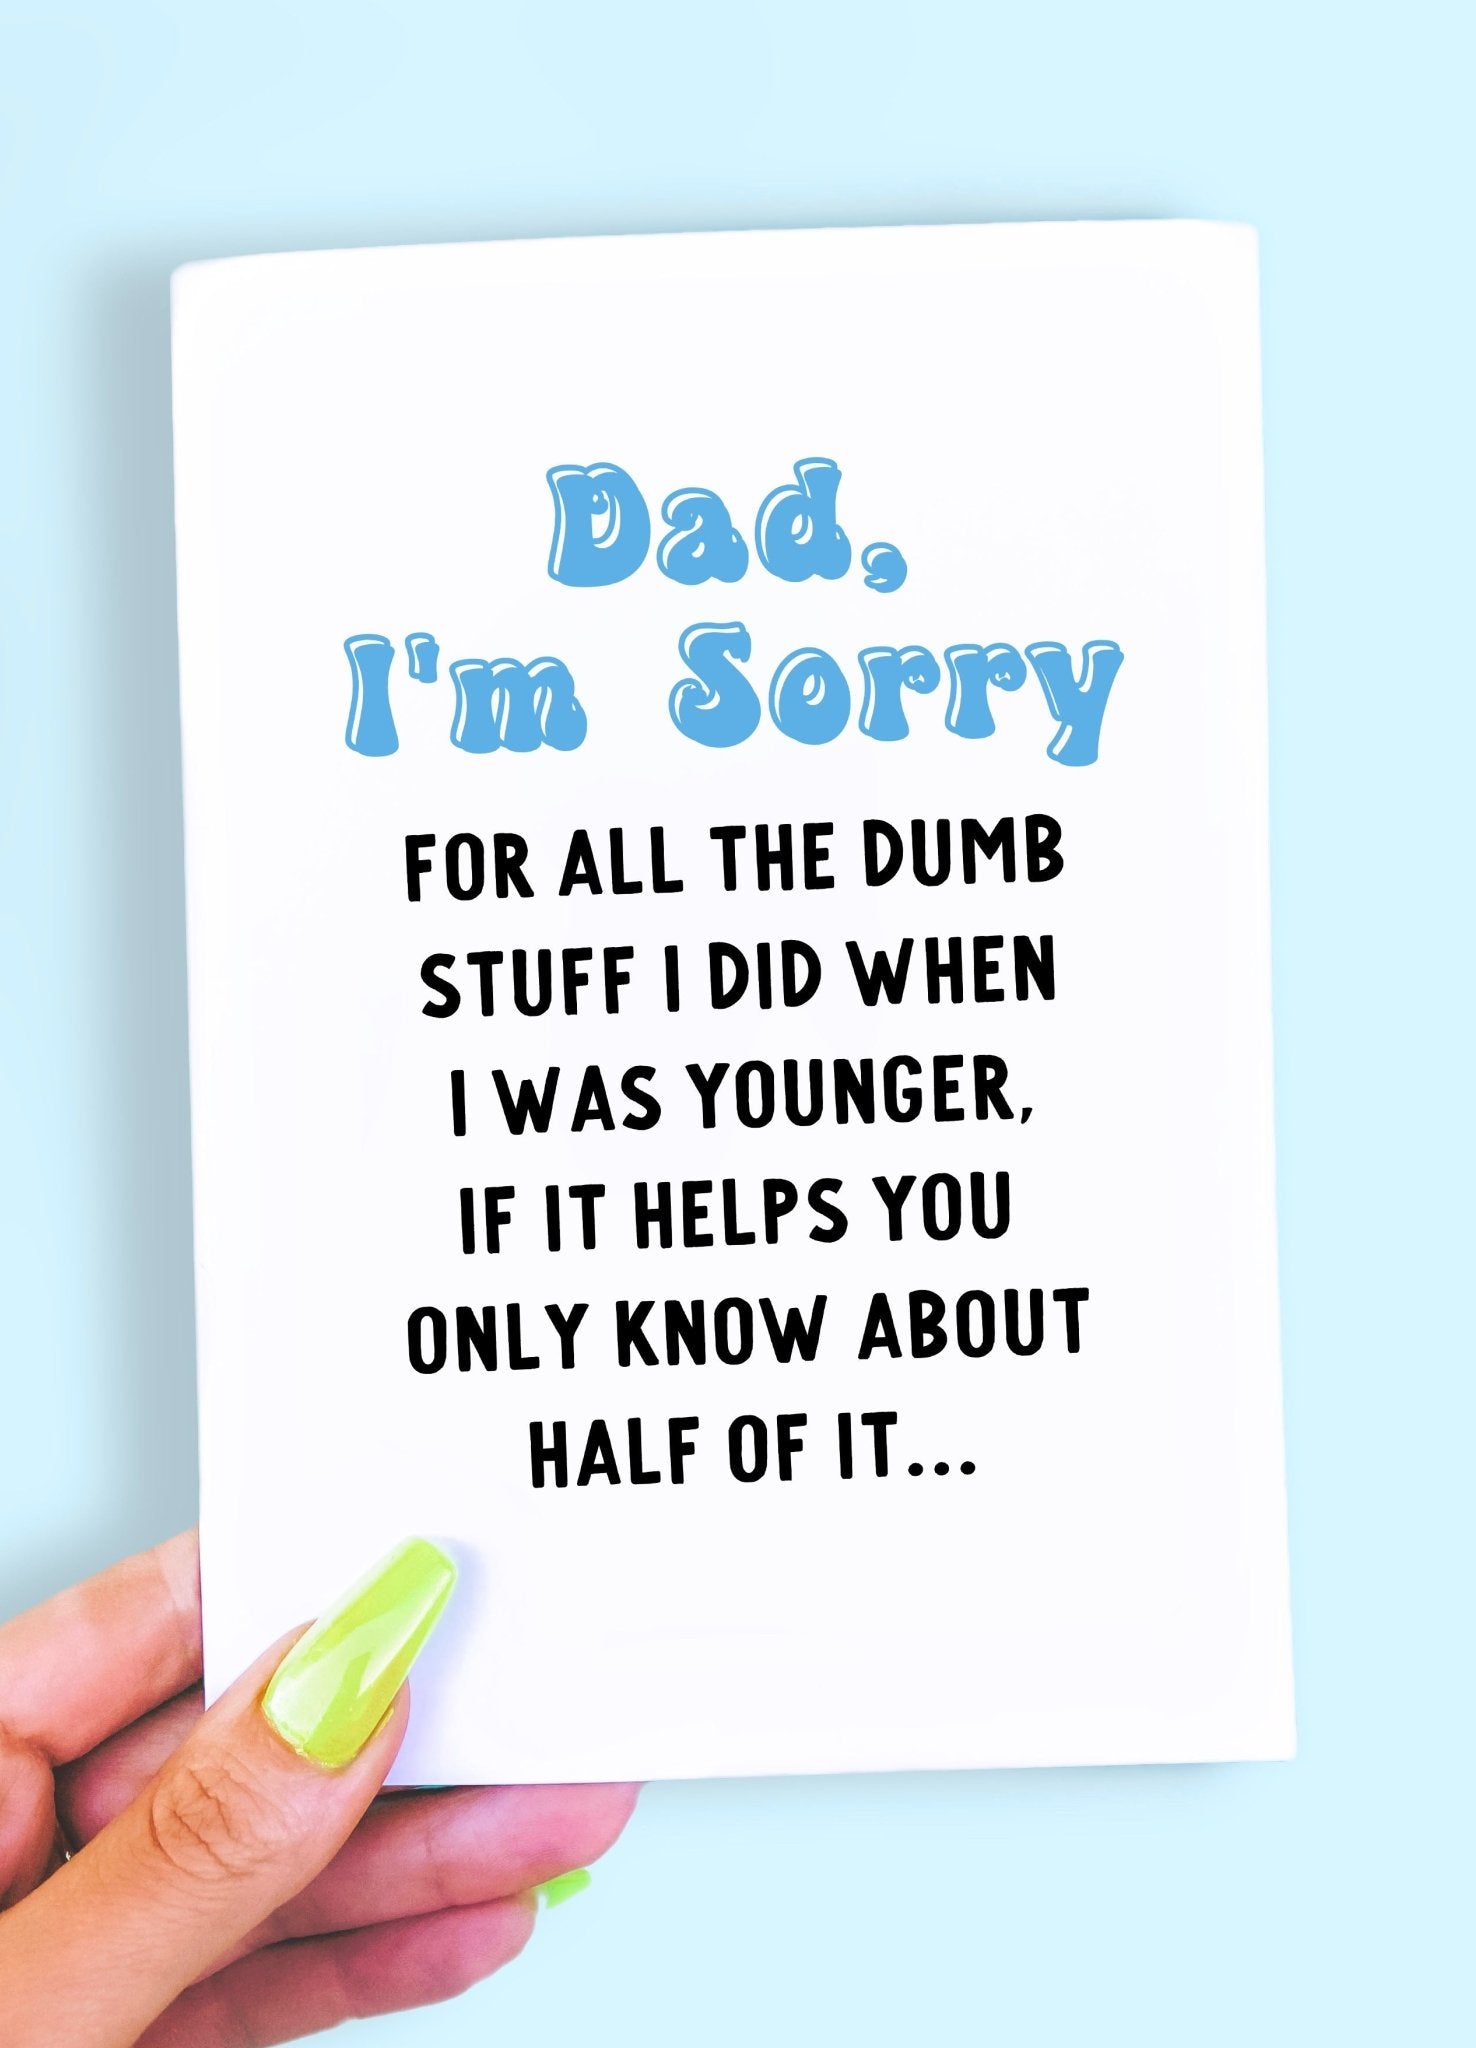 Sorry For All The Dumb Stuff Father's Day Greeting Cards - UntamedEgo LLC.